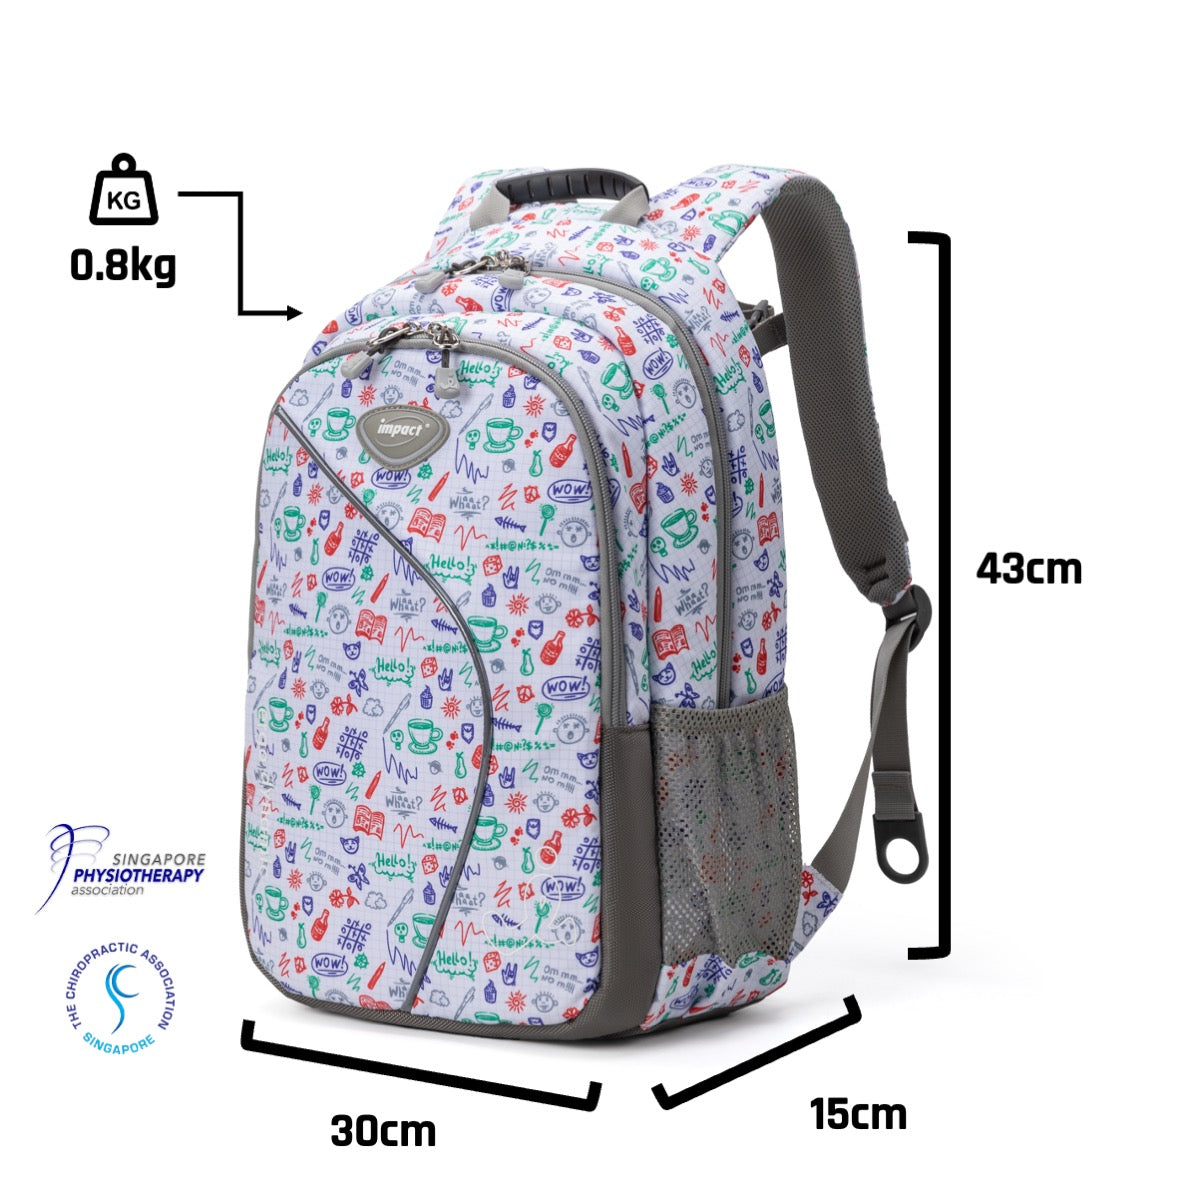 Impact School Bag IPEG-158 - Ergo-Comfort Spinal Support Primary Secondary School Backpack (Special Editions)